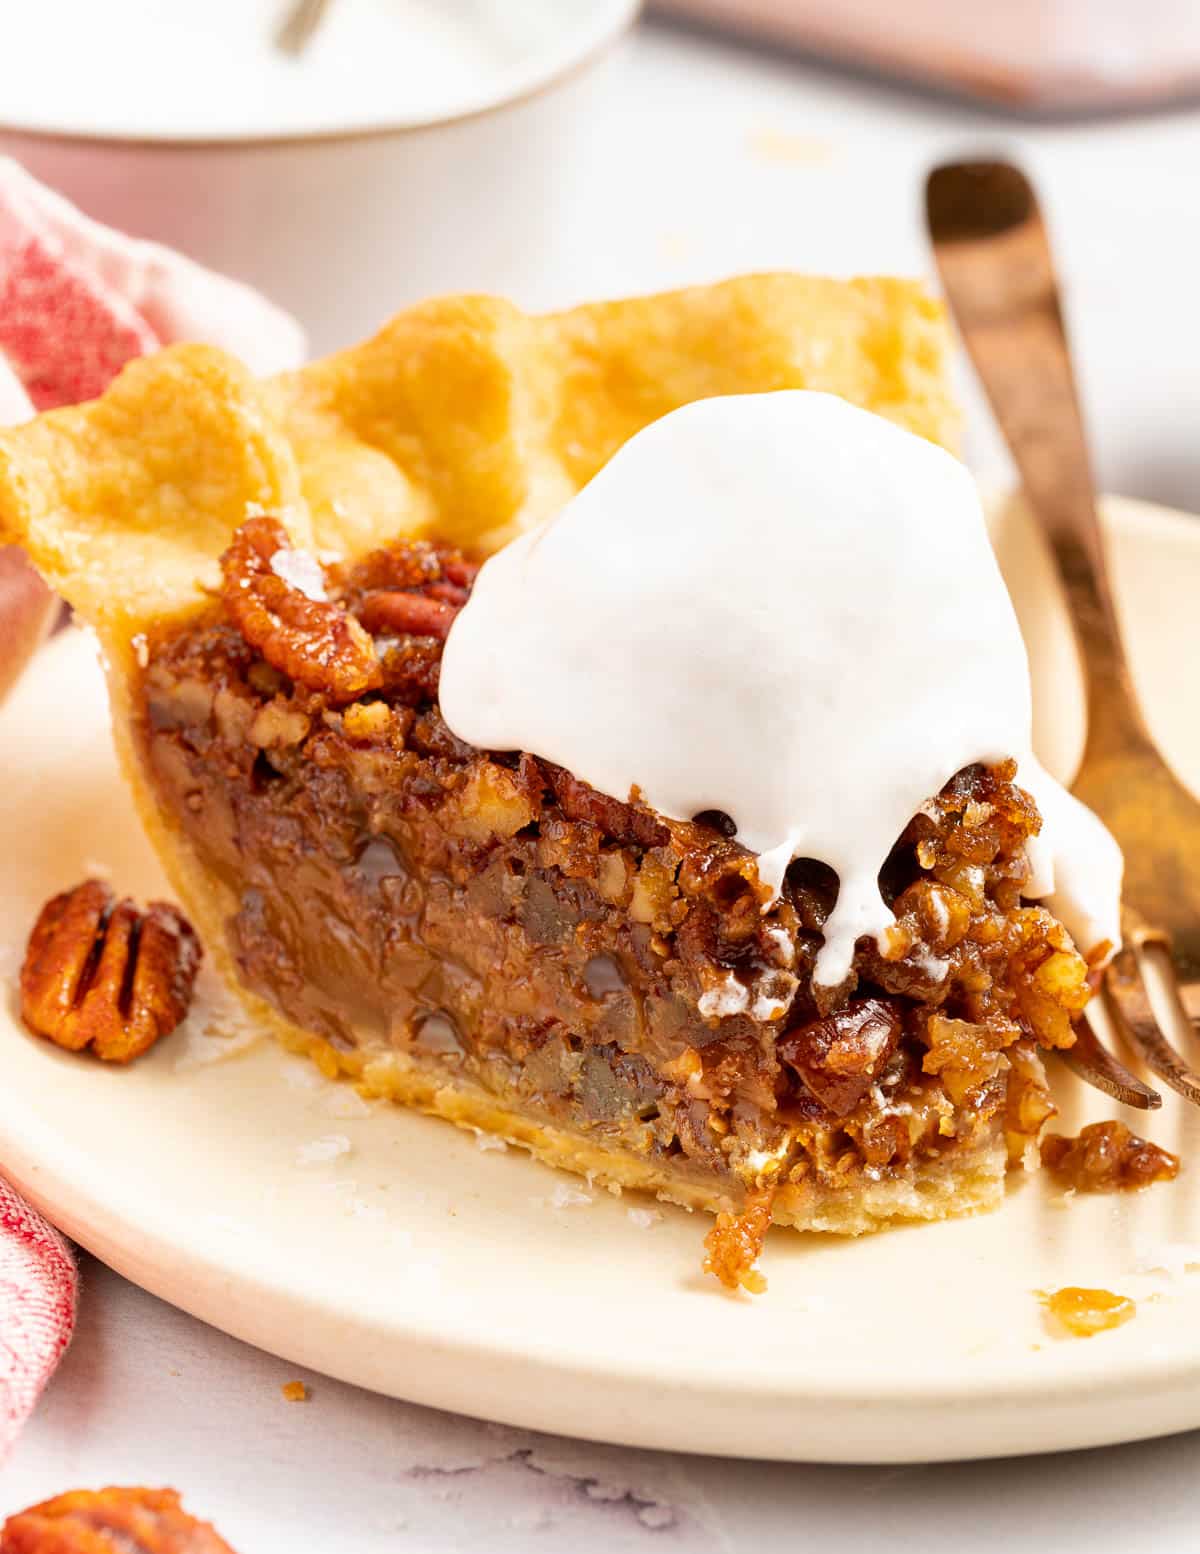 a slice of vegan pecan pie  and a dollop of cocowhip, with a bite taken from the end